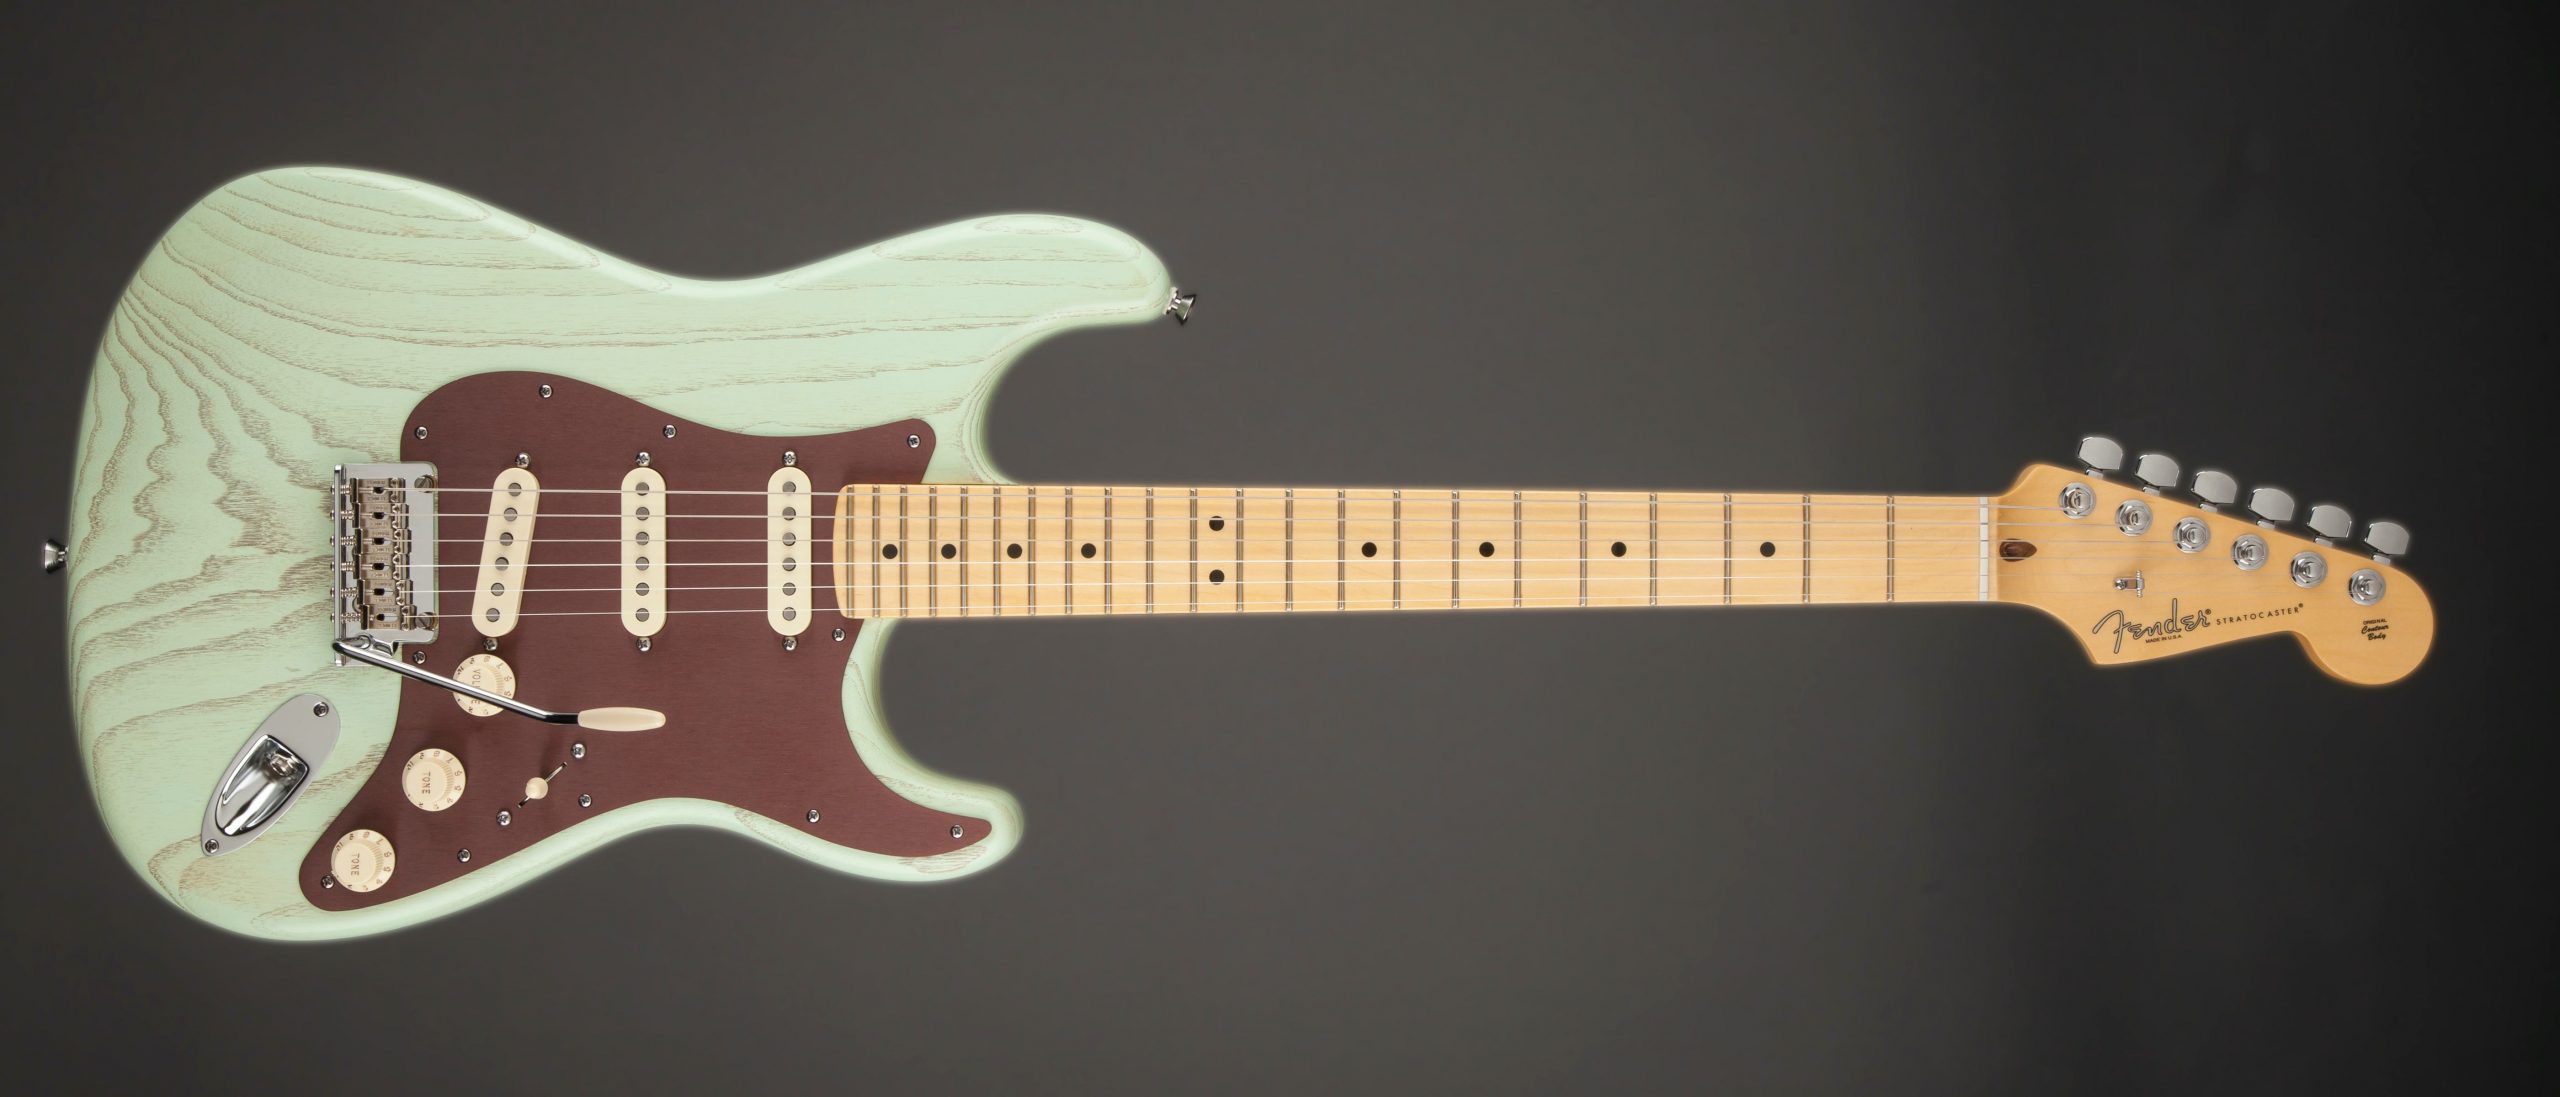 Fender Stratocaster with Ash body by Fender